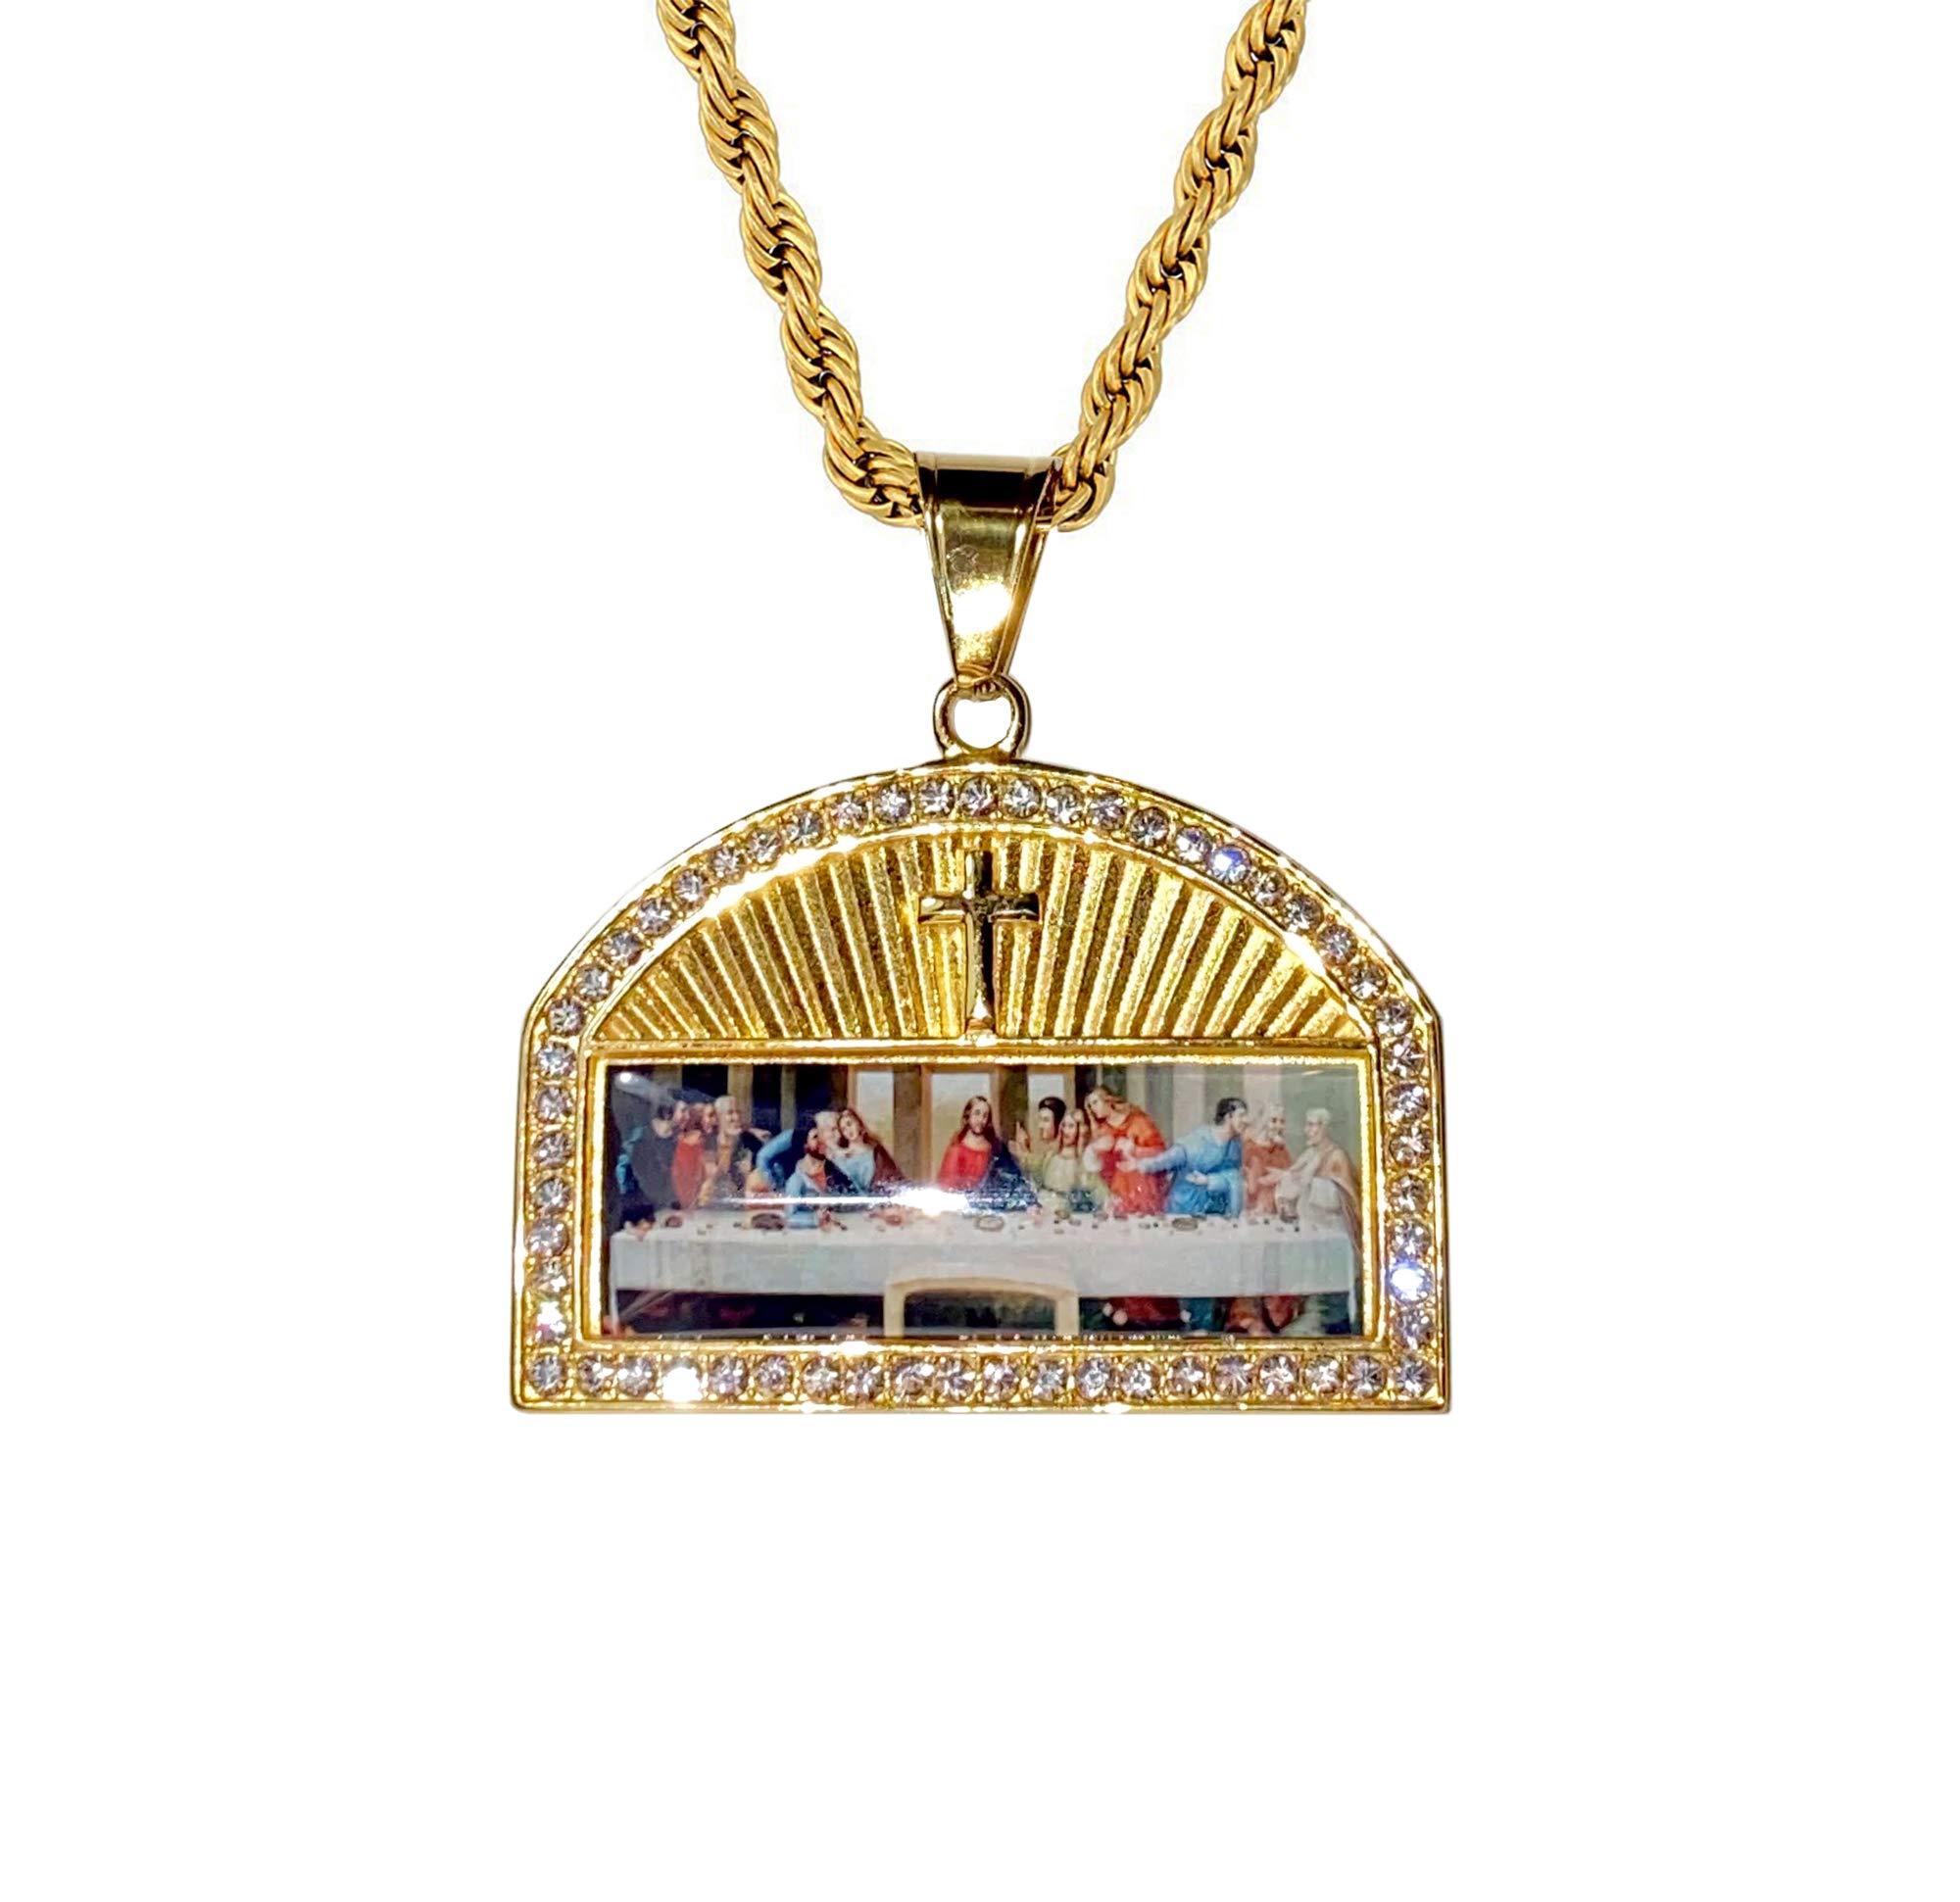 Men Women 925 Italy 14k Gold Finish Iced Big Last Supper of Jesus with His Disciples Pendant Necklace Necklace Punk Retro Vintage Style Bull Head Pendant Stainless Steel Real 2.5 mm Rope Chain Necklace, Men's Jewelry, Family Dinner Chain Pendant Rope Neck